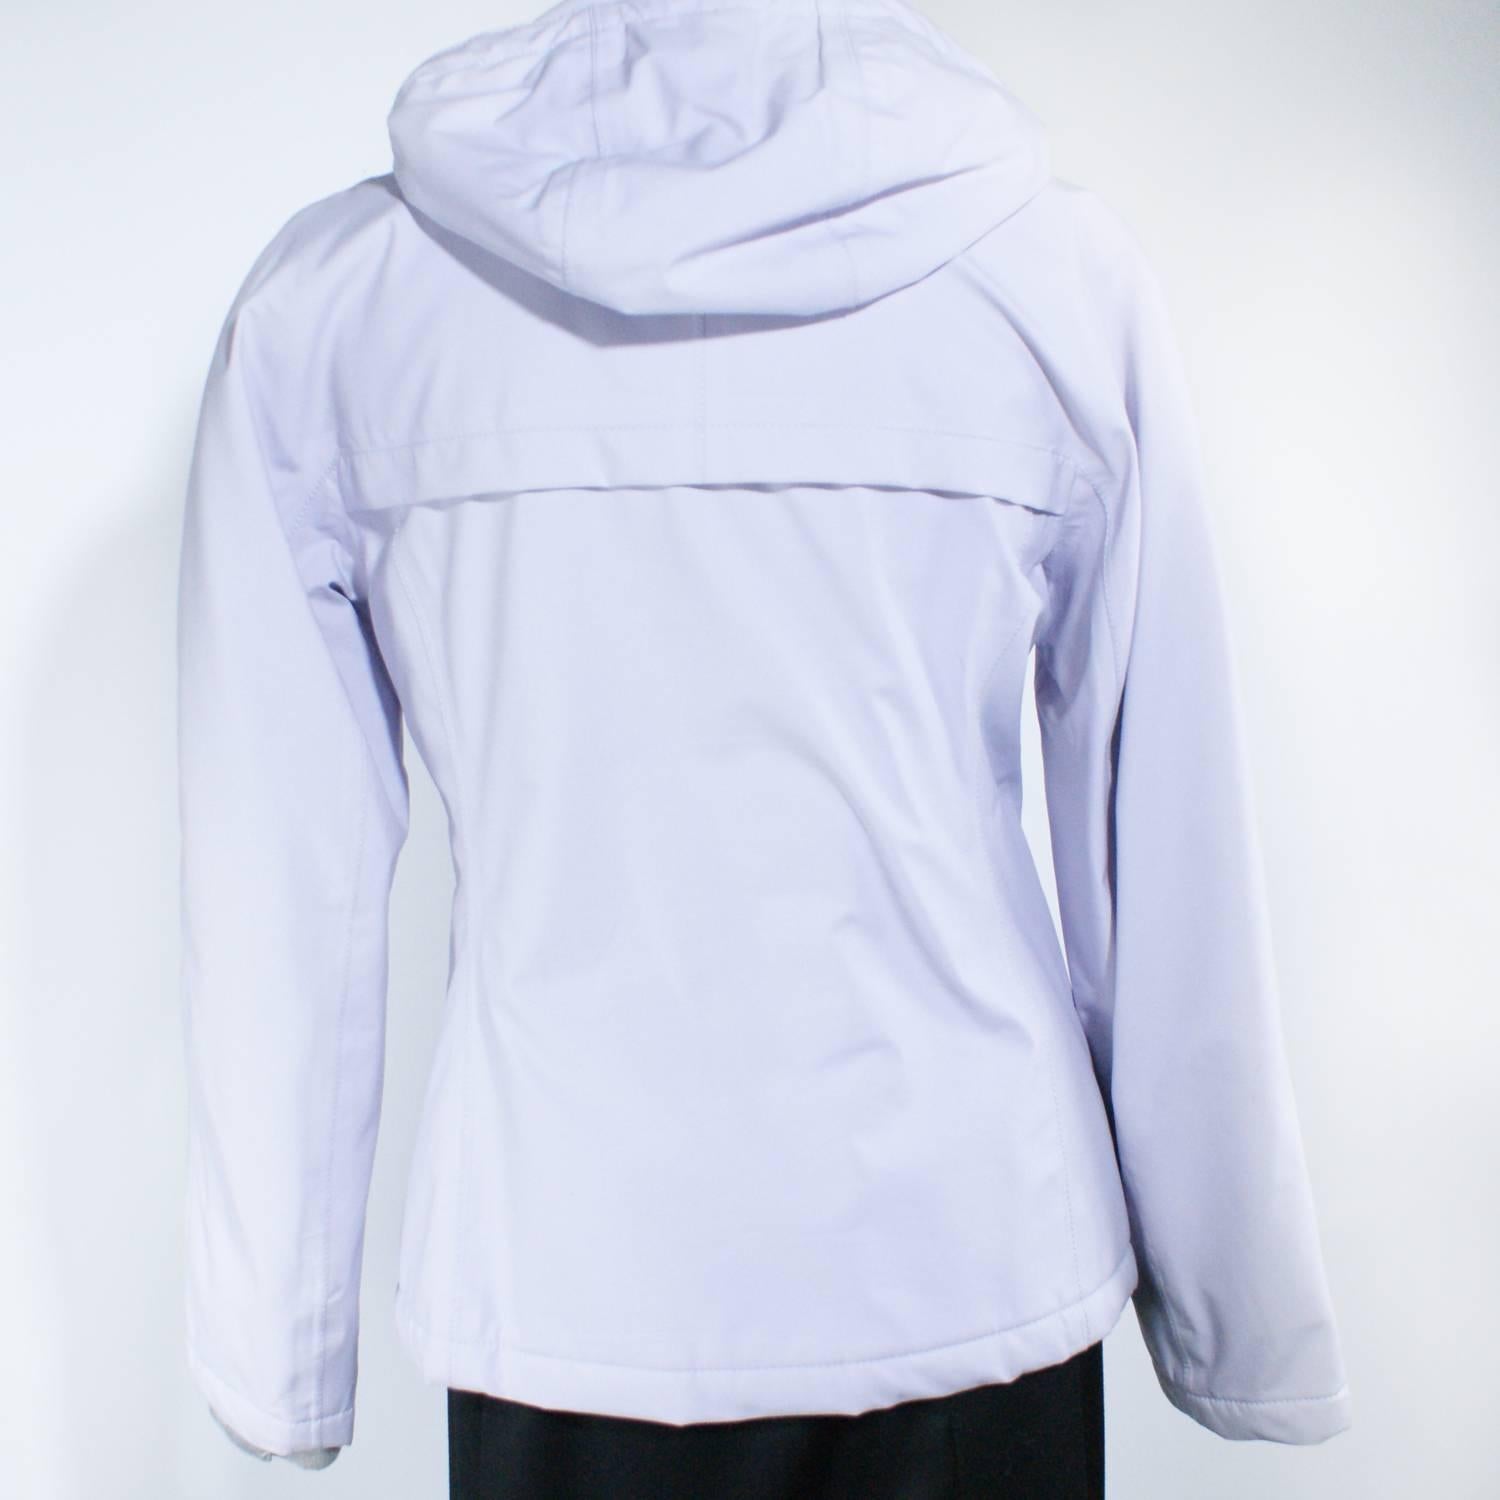 Lavender colored Prada jacket 
Crafted in sports Gore-Tex 
Zip closure 
Zip pockets
Hood
Size 38